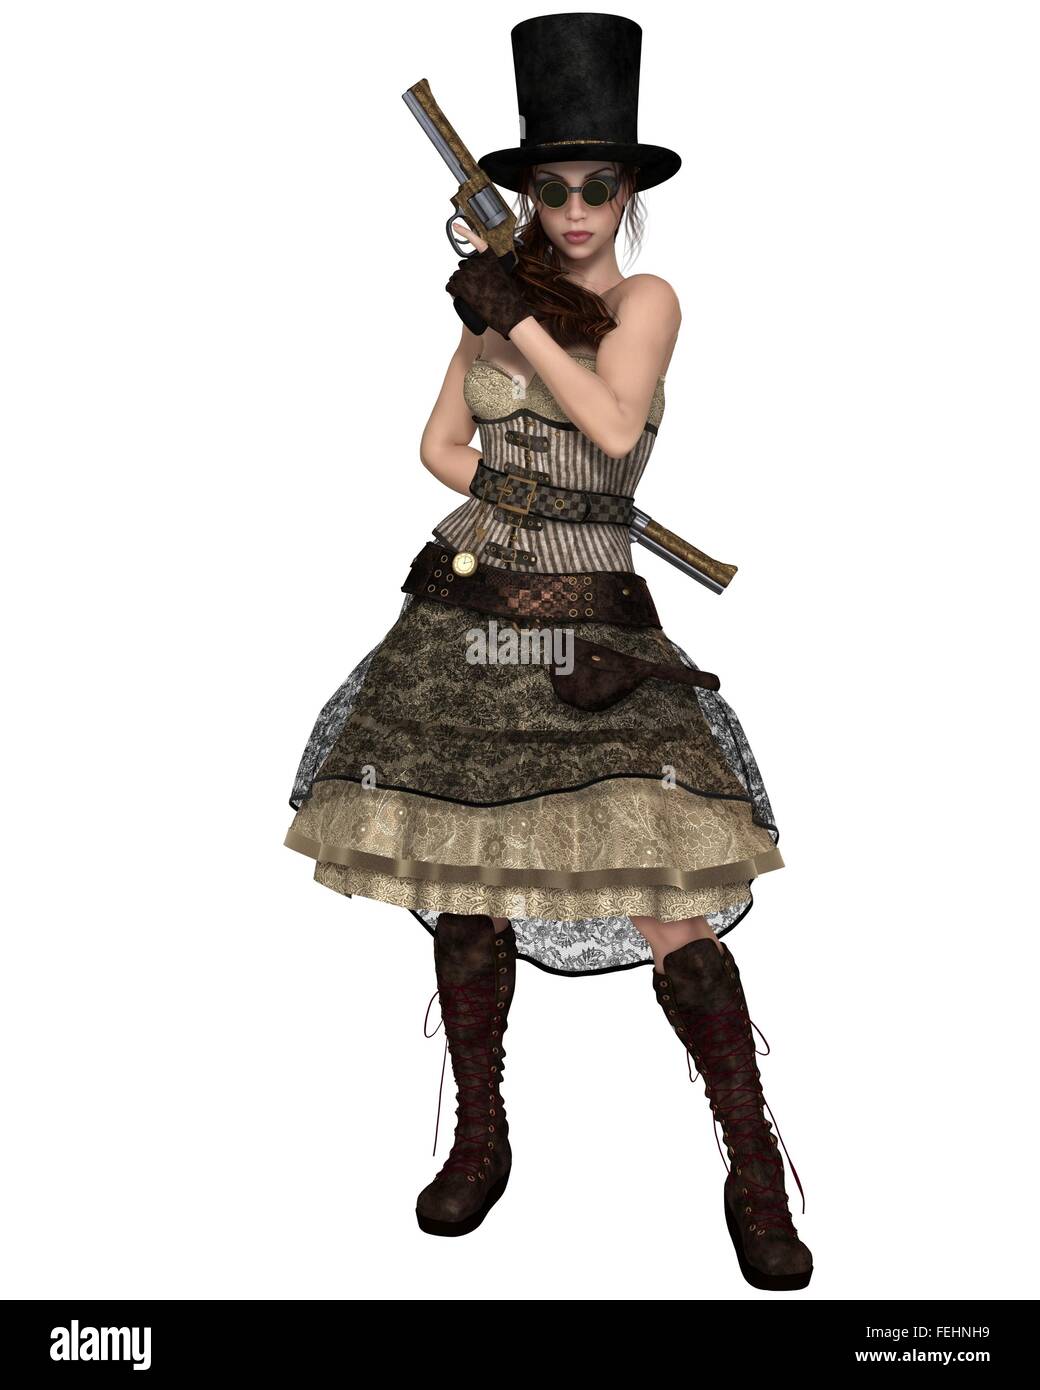 Steampunk Woman with Stovepipe Hat and Two Revolvers Stock Photo